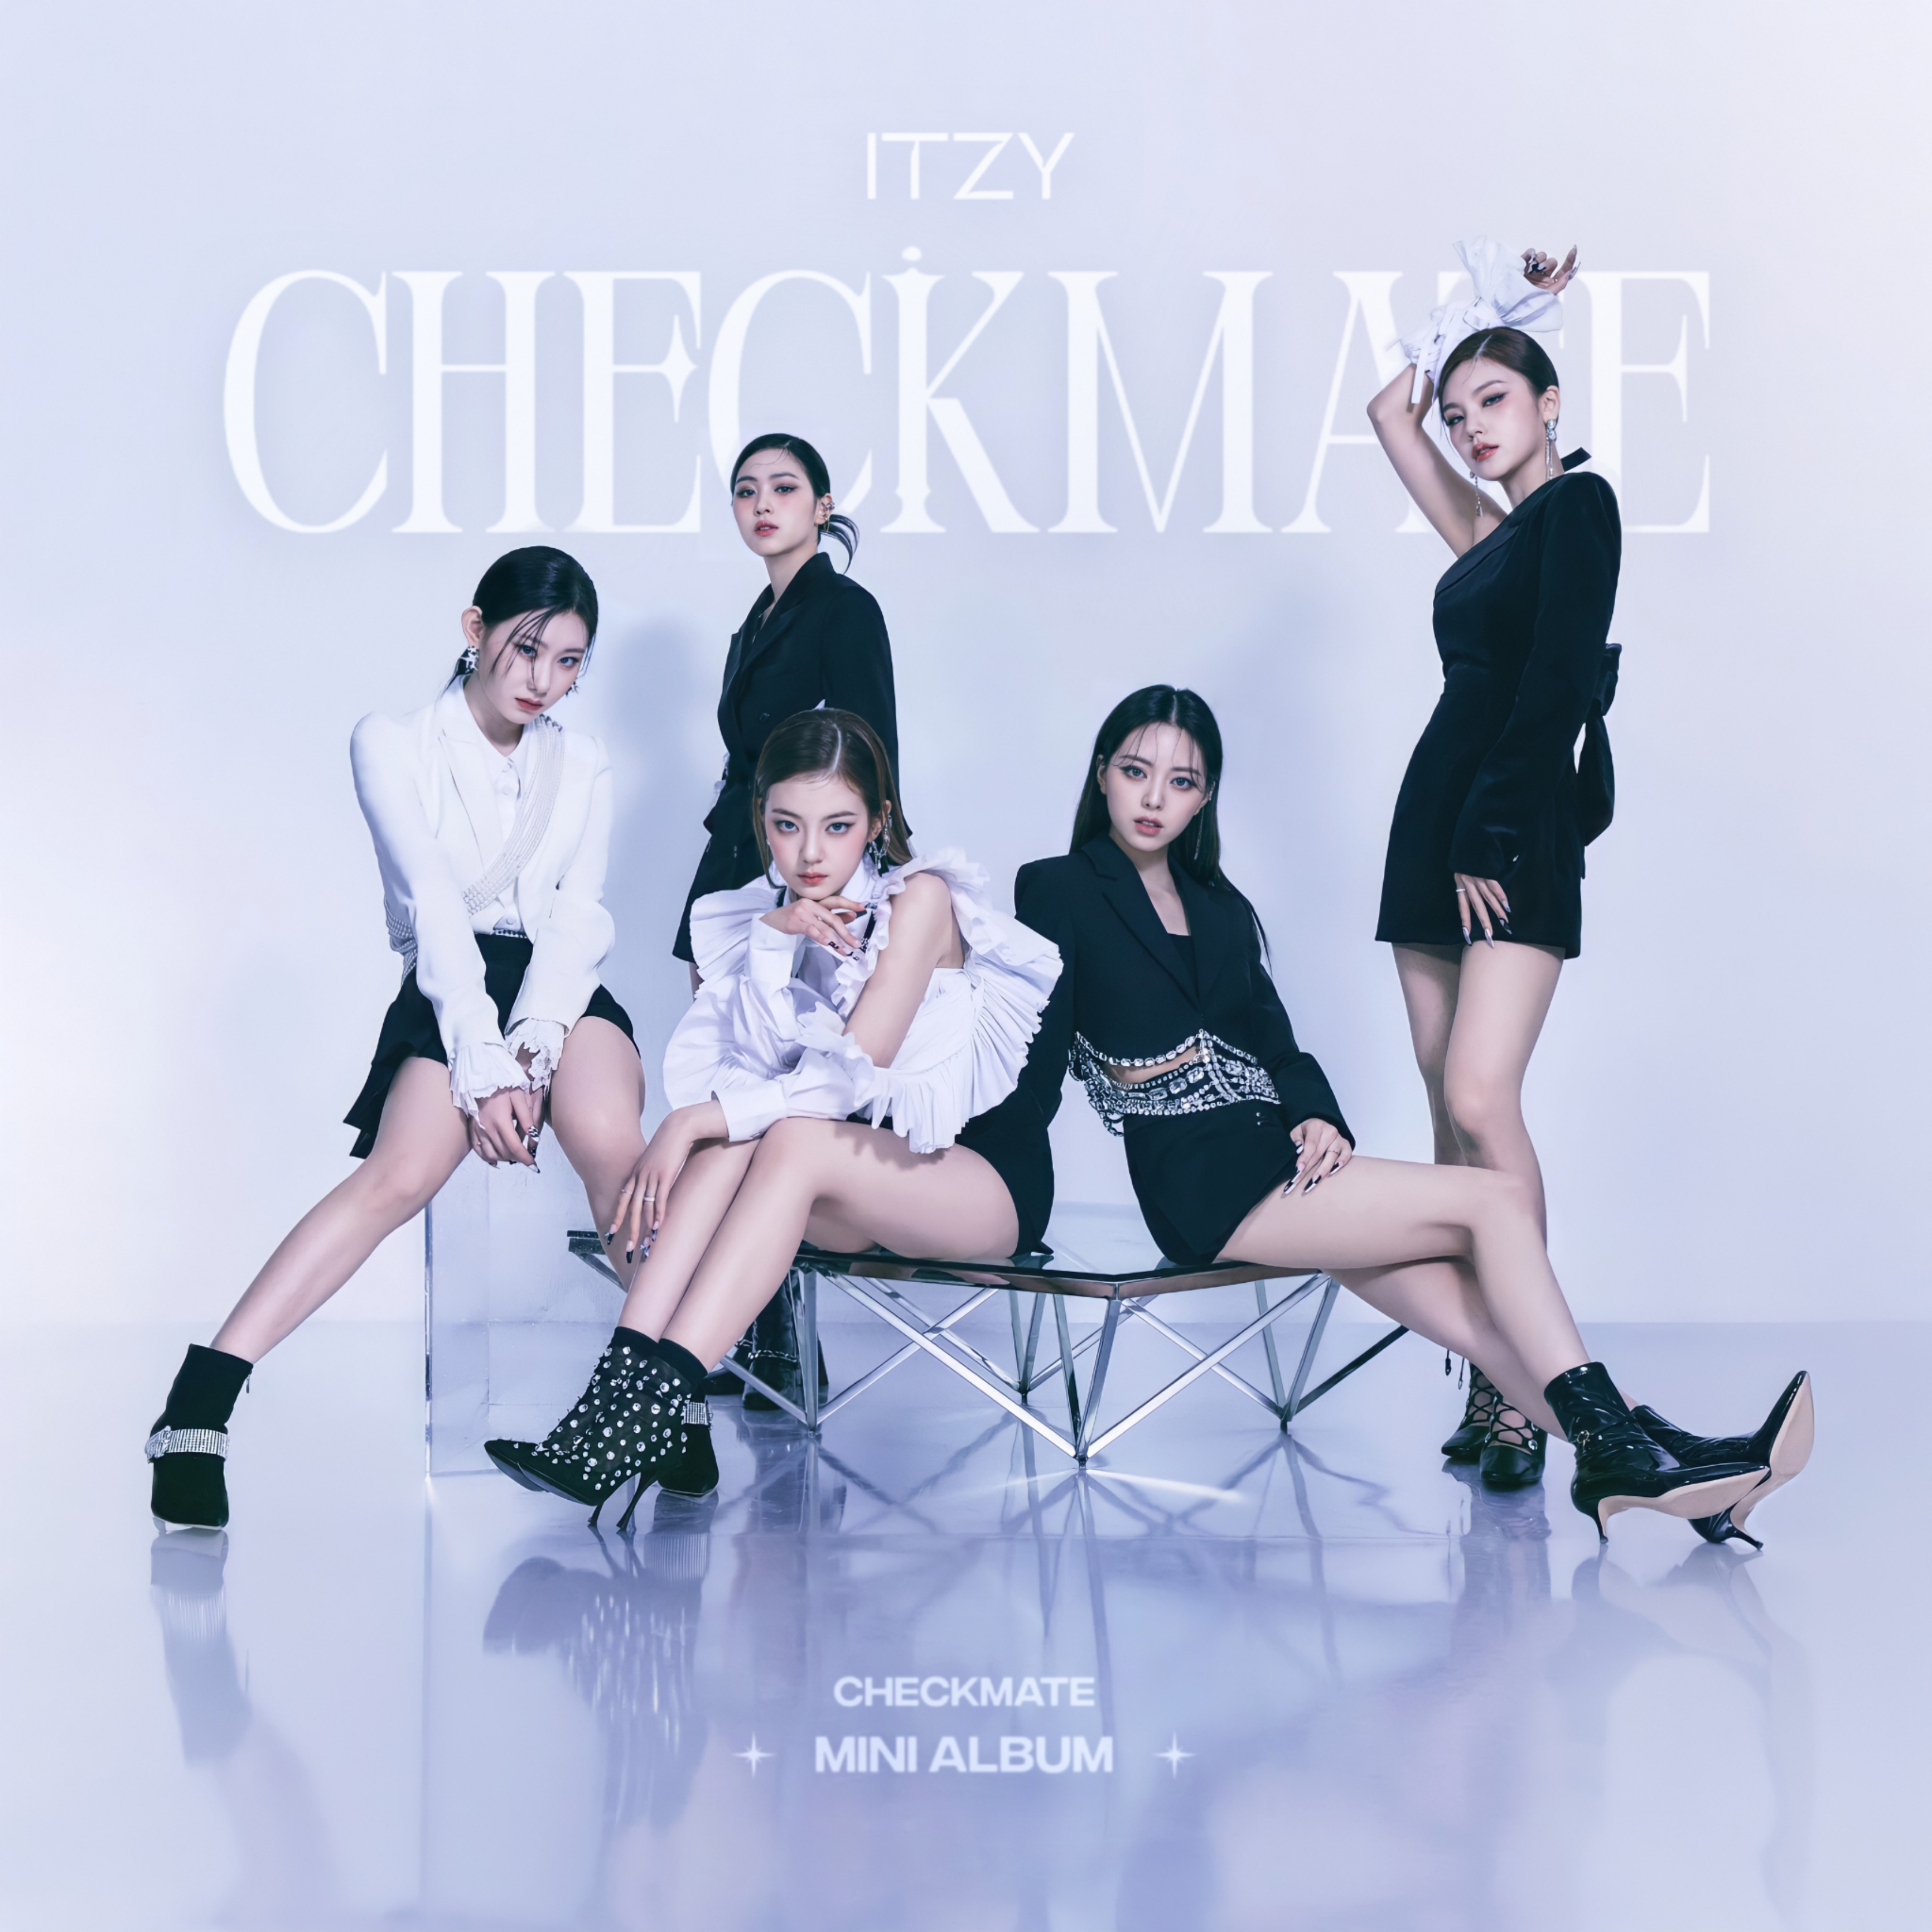 ITZY SNEAKERS / CHECKMATE album cover #2 by LEAlbum DeviantArt